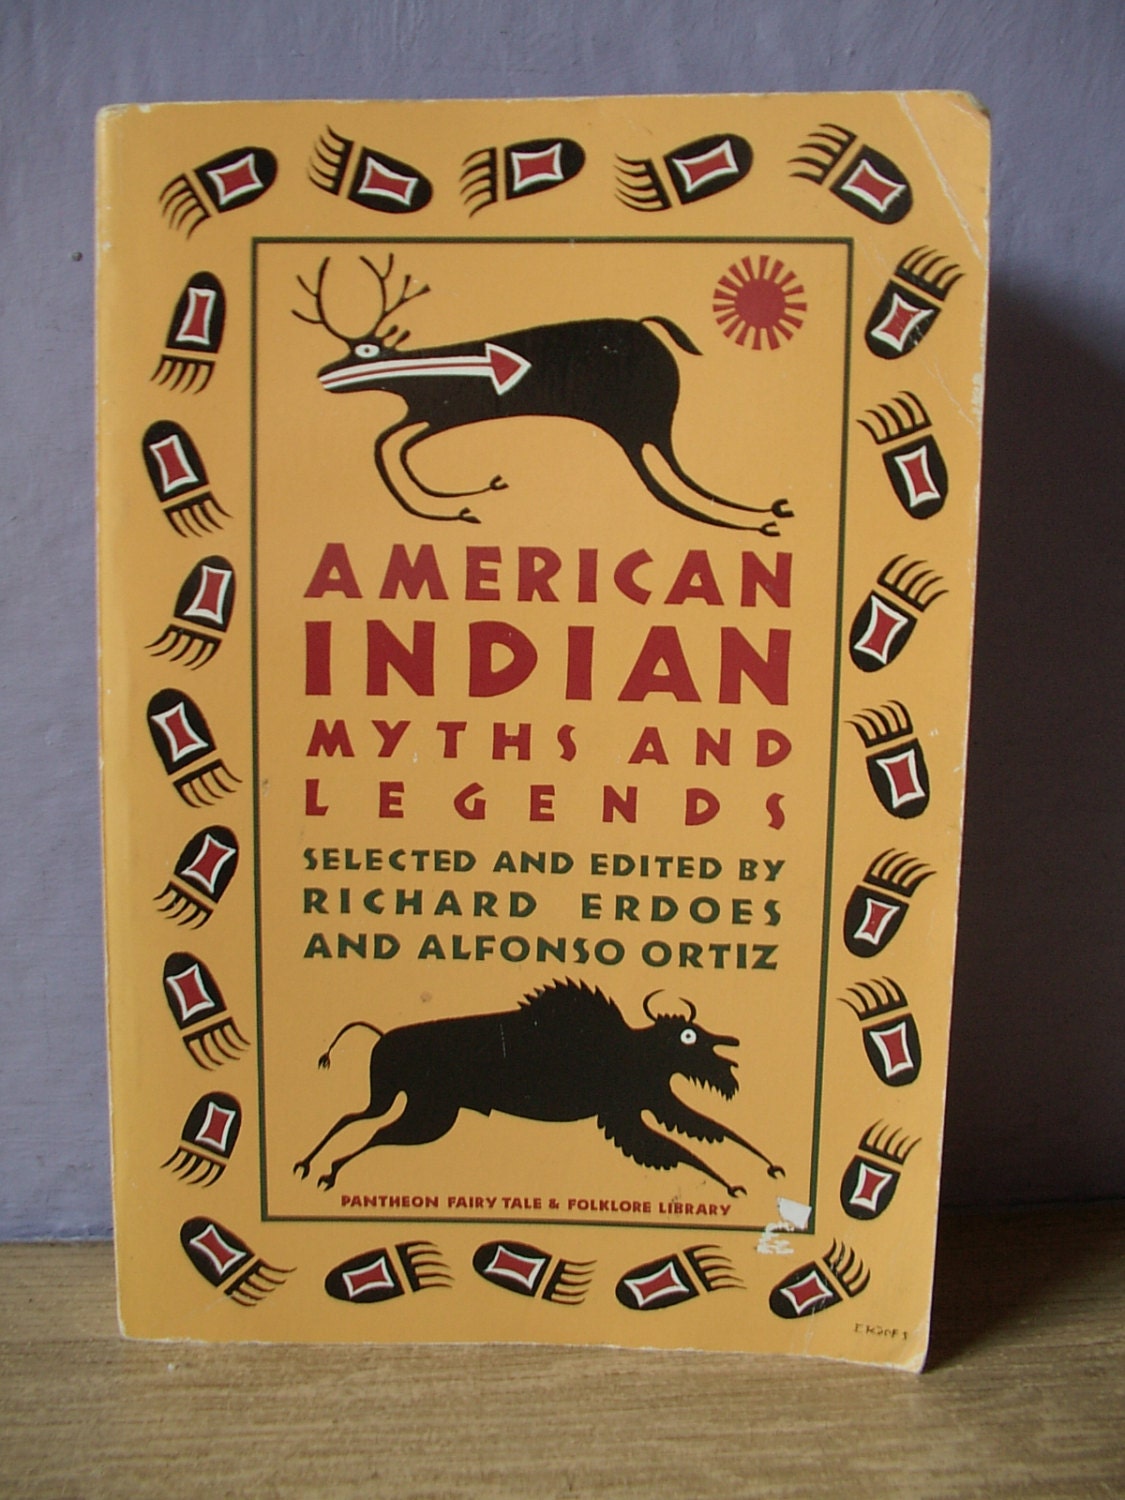 Cinderell The American Indian Myths And Legends